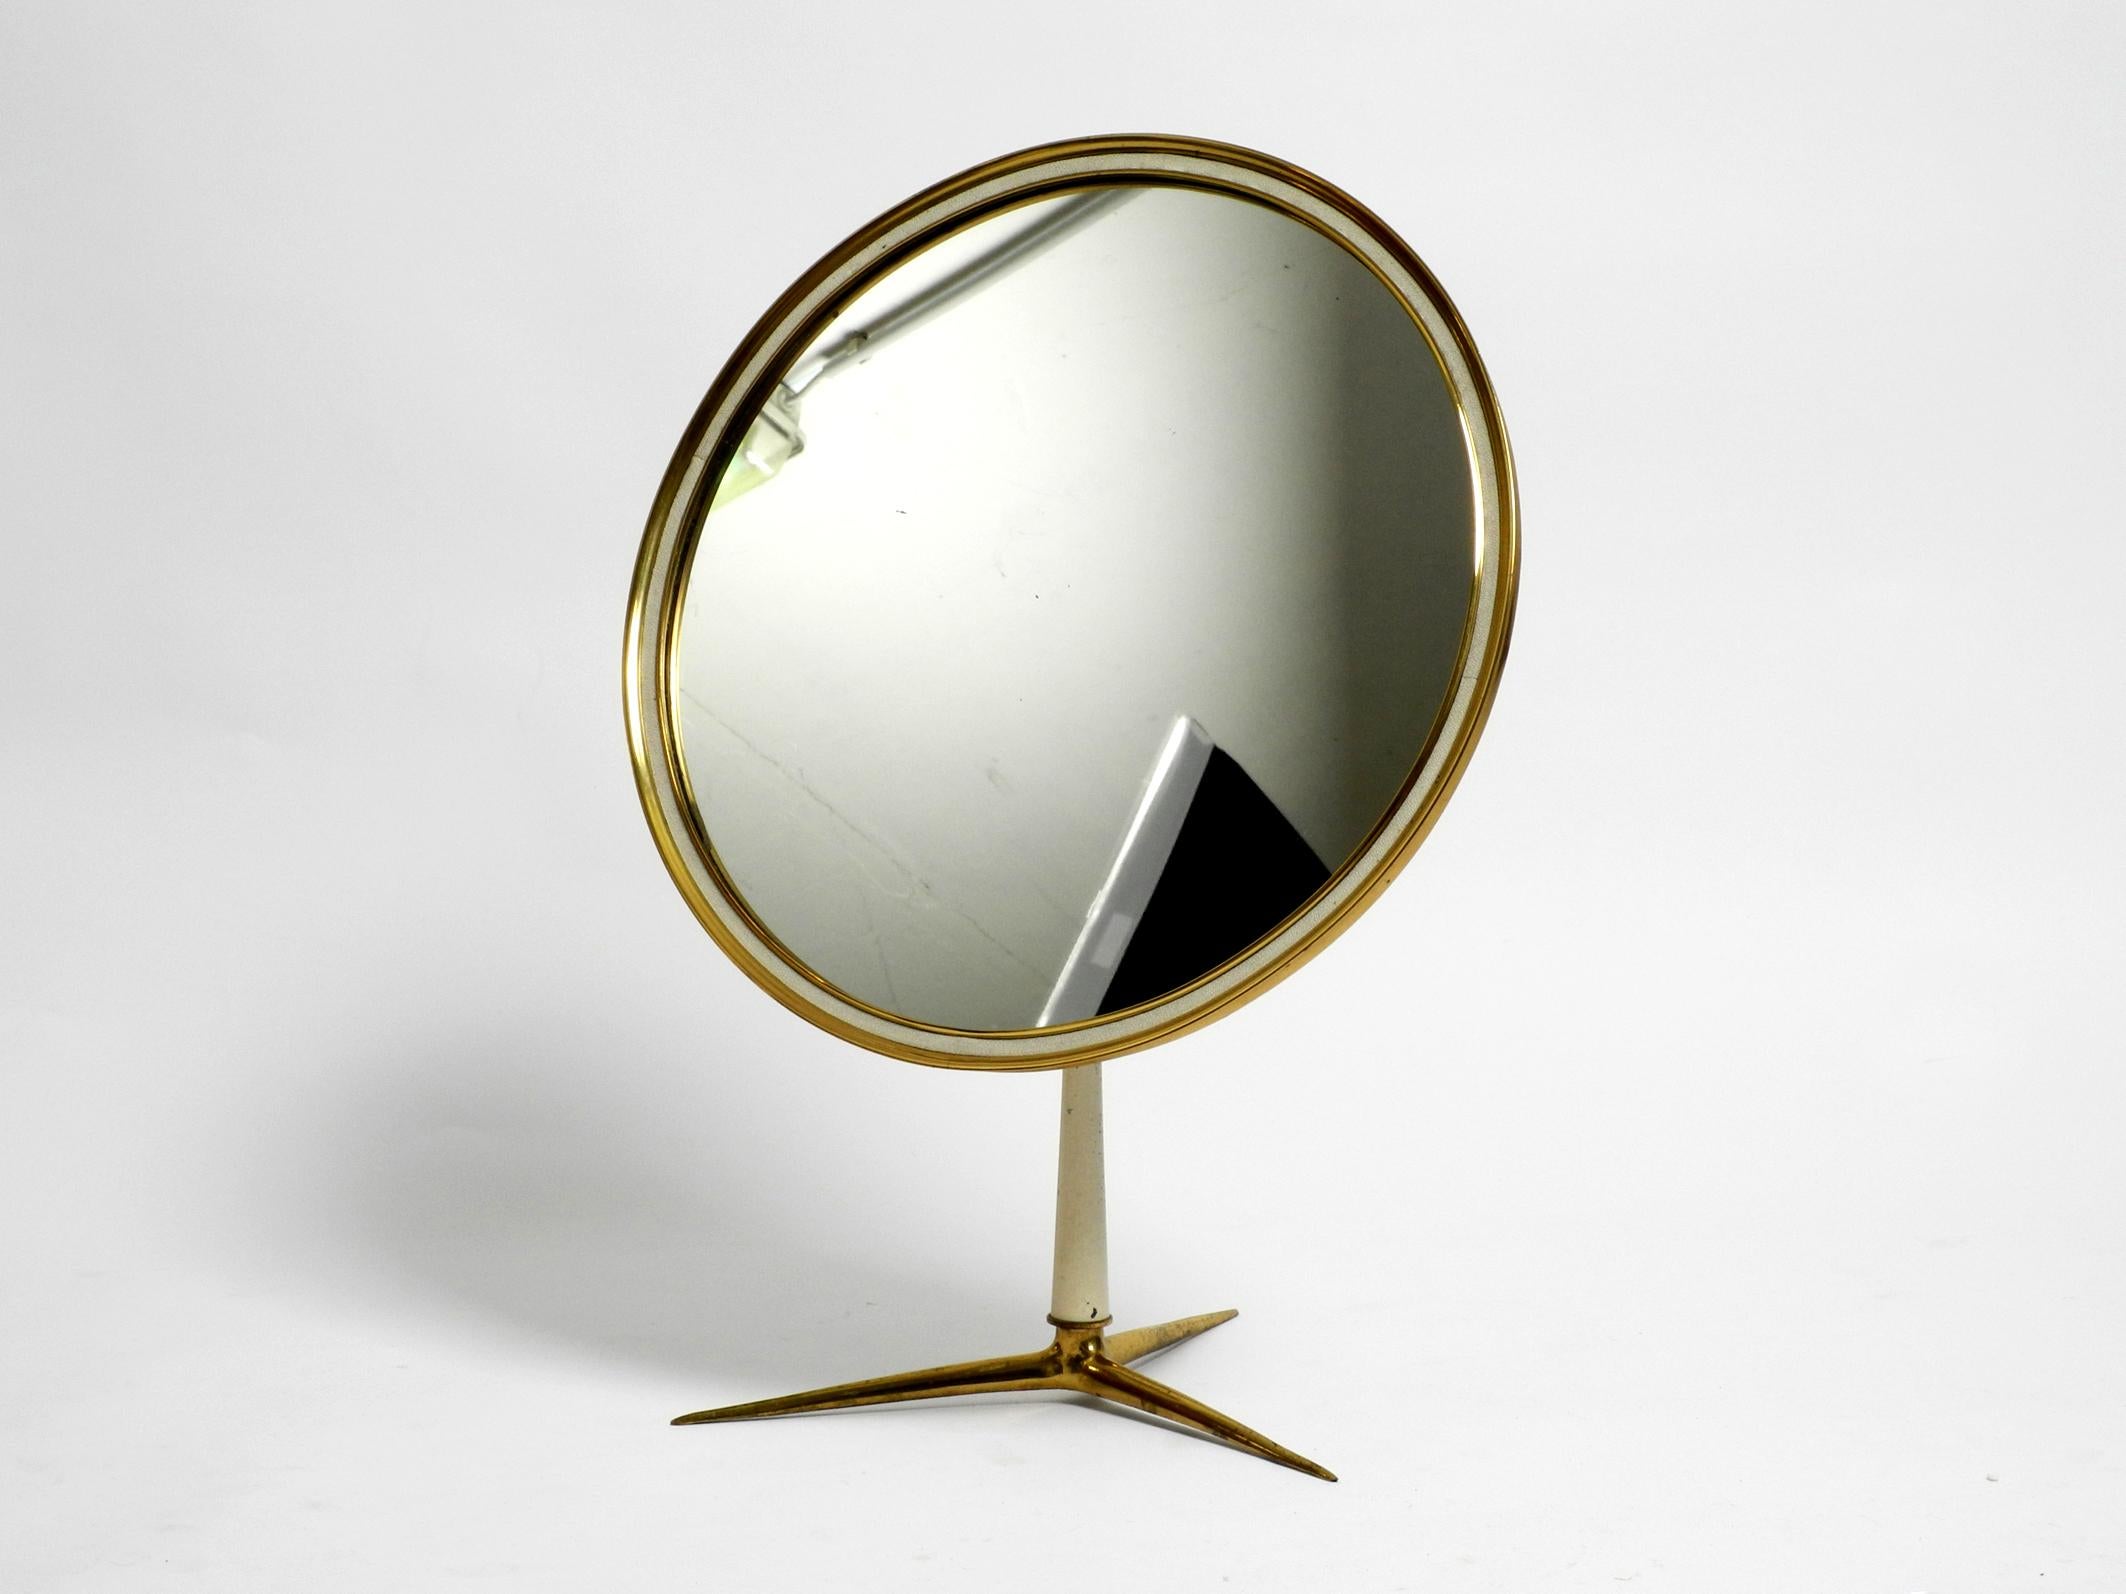 Beautiful, very rare, large, moveable, midcentury, three-legged base table mirror.
Manufacturer is Vereinigten Werkstätten. Made in Germany.
In the typical 1950s design with a round brass frame.
Heavy brass mirror frame and base. Cast aluminum